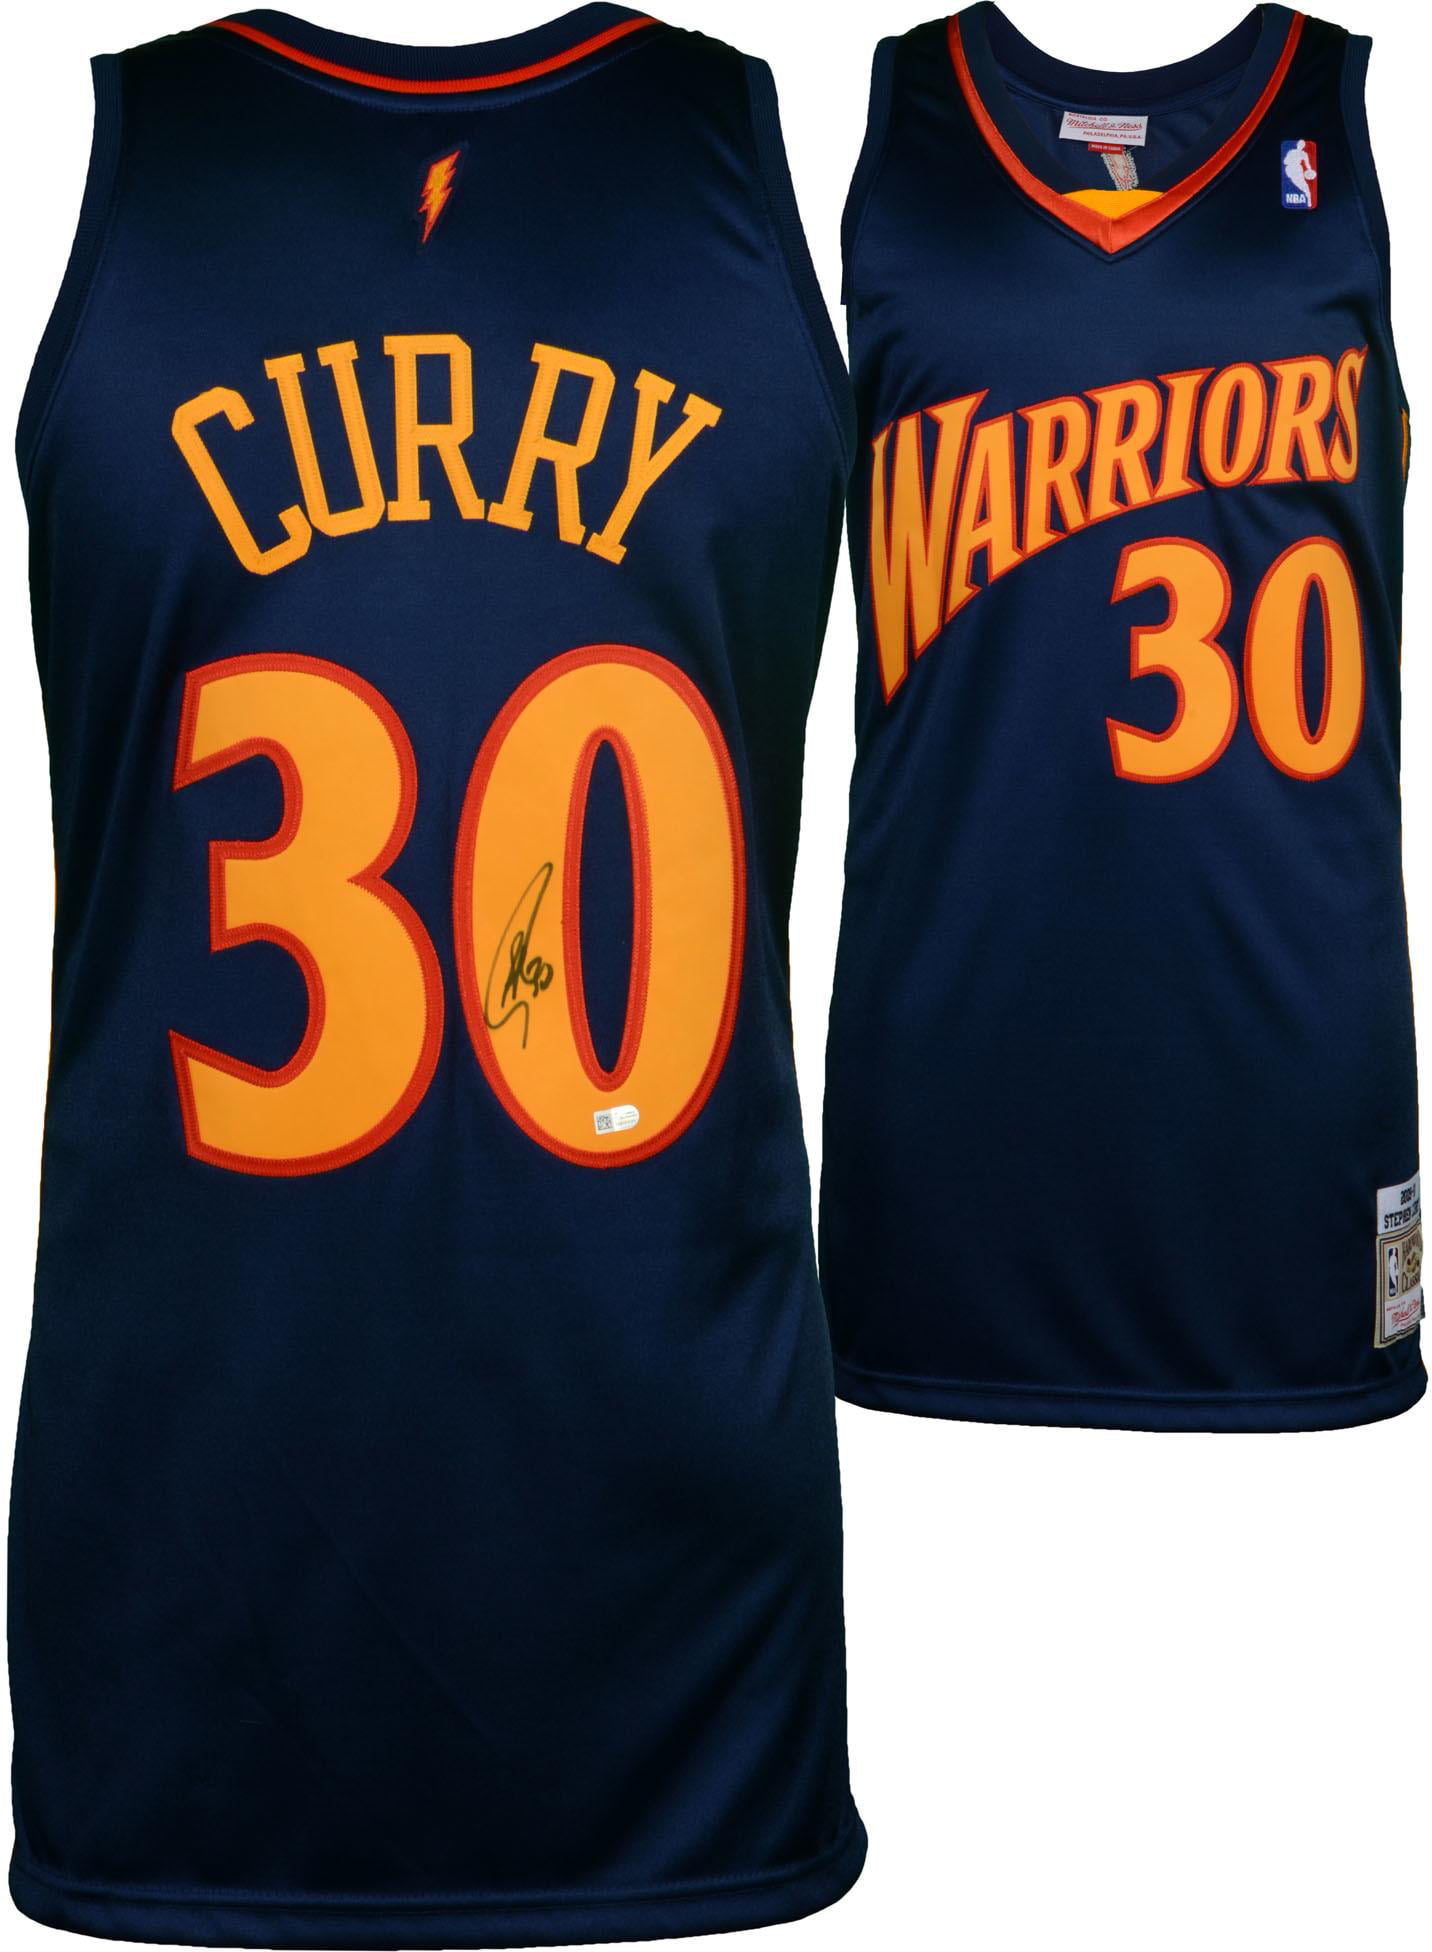 authentic golden state warriors jersey